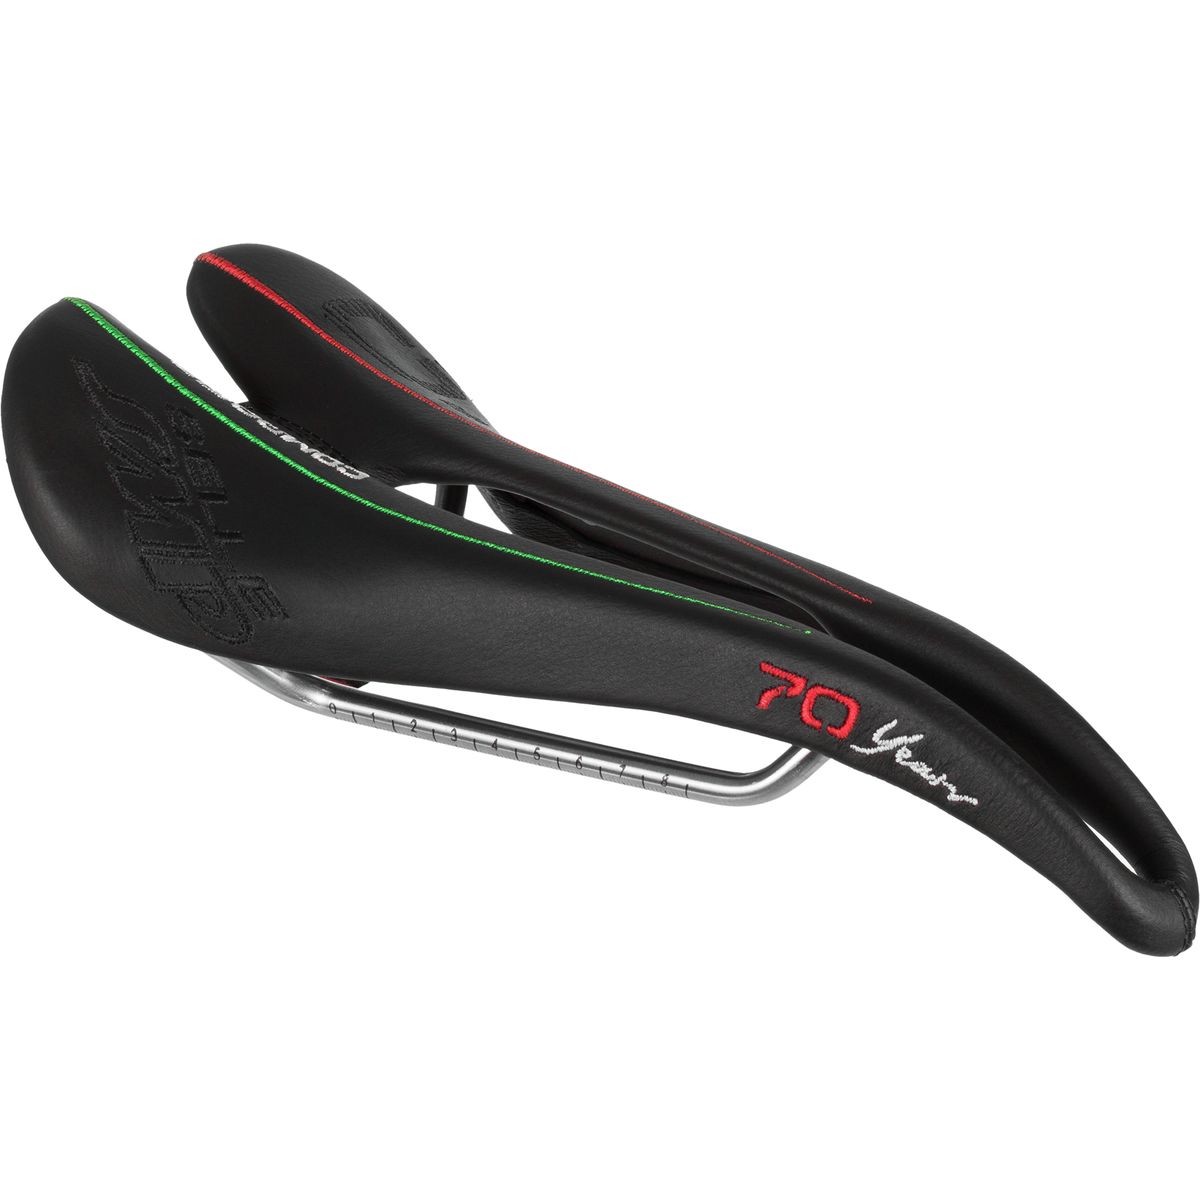 Selle SMP Composit 70th Anniversary Limited Edition Saddle